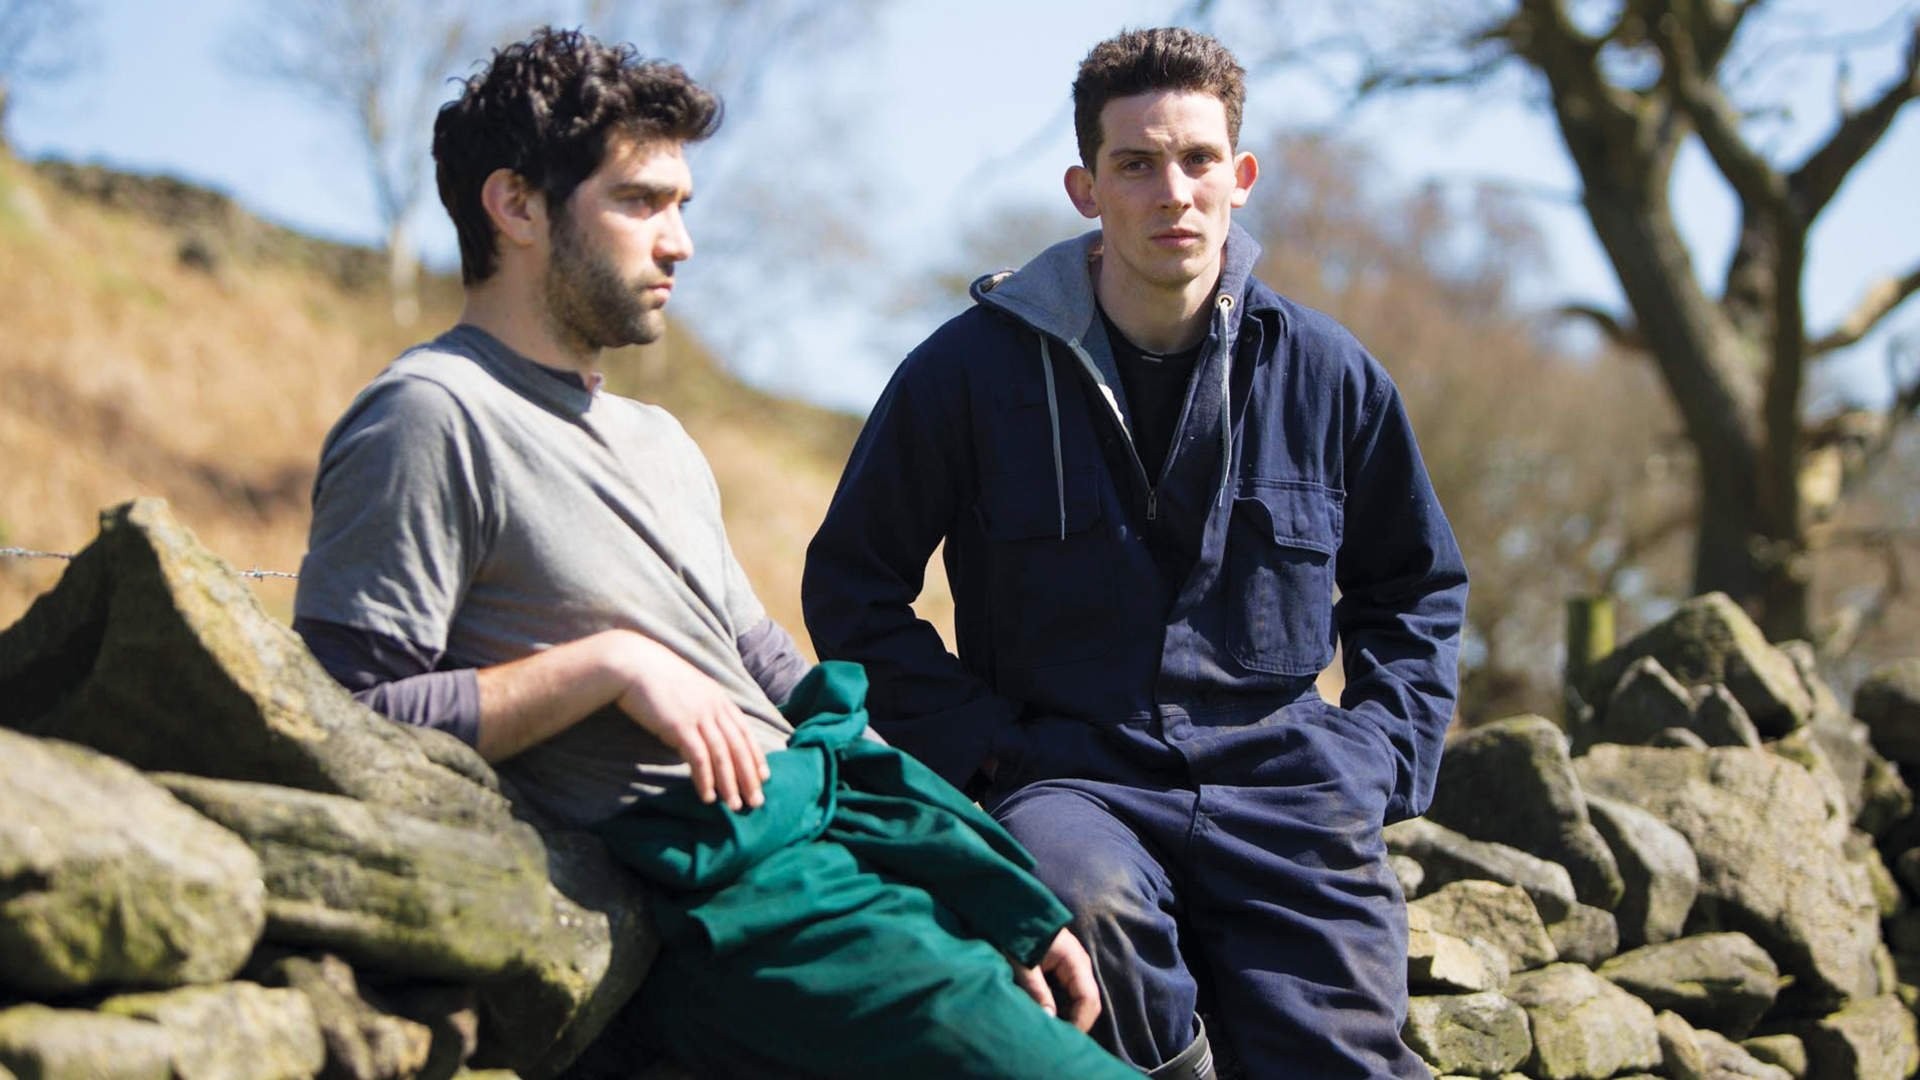 Play Summer 19:  God's own country